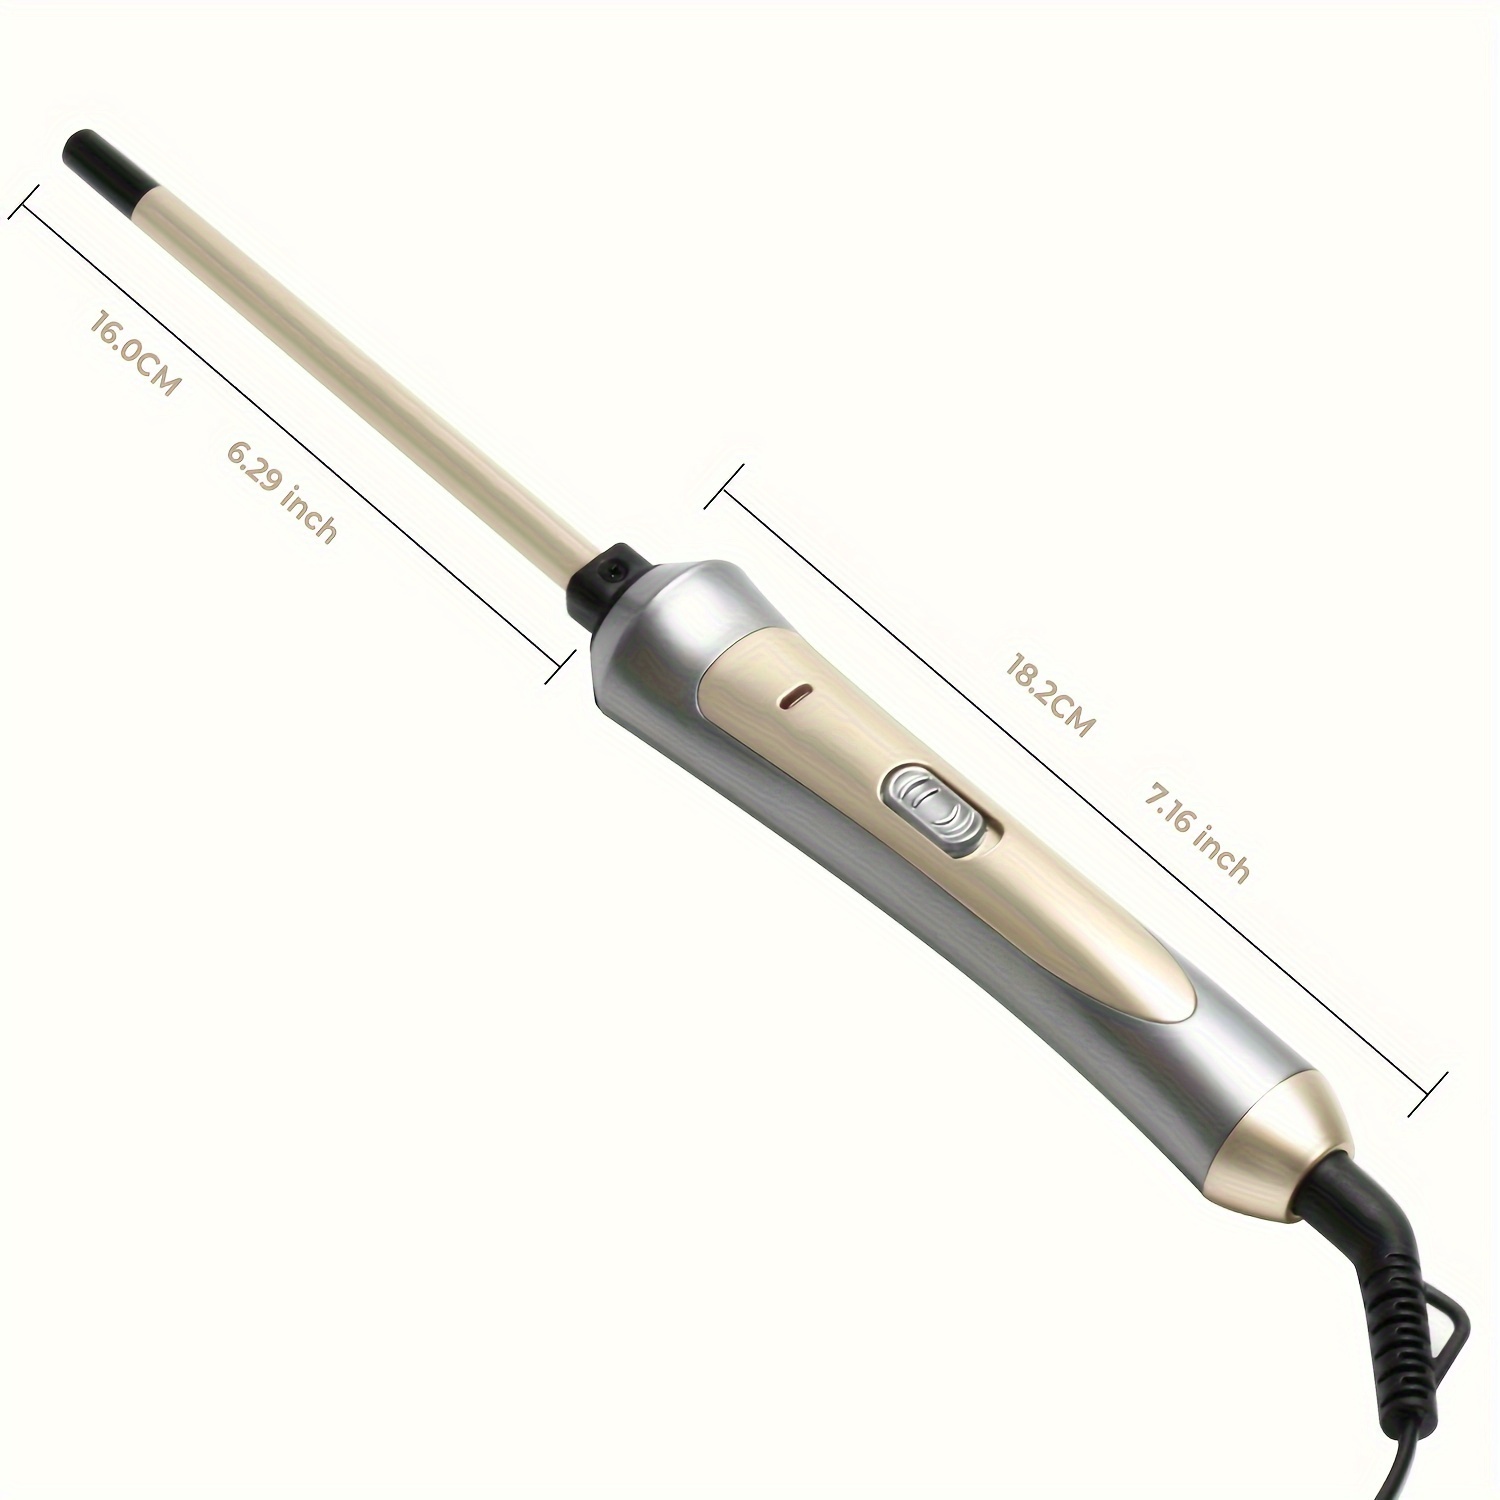 9MM Thin Hair Curler 3/8 Inch Small Barrel Curling Iron Professional  Curling Wand Ceramic Small Tongs For Short And Long Hair